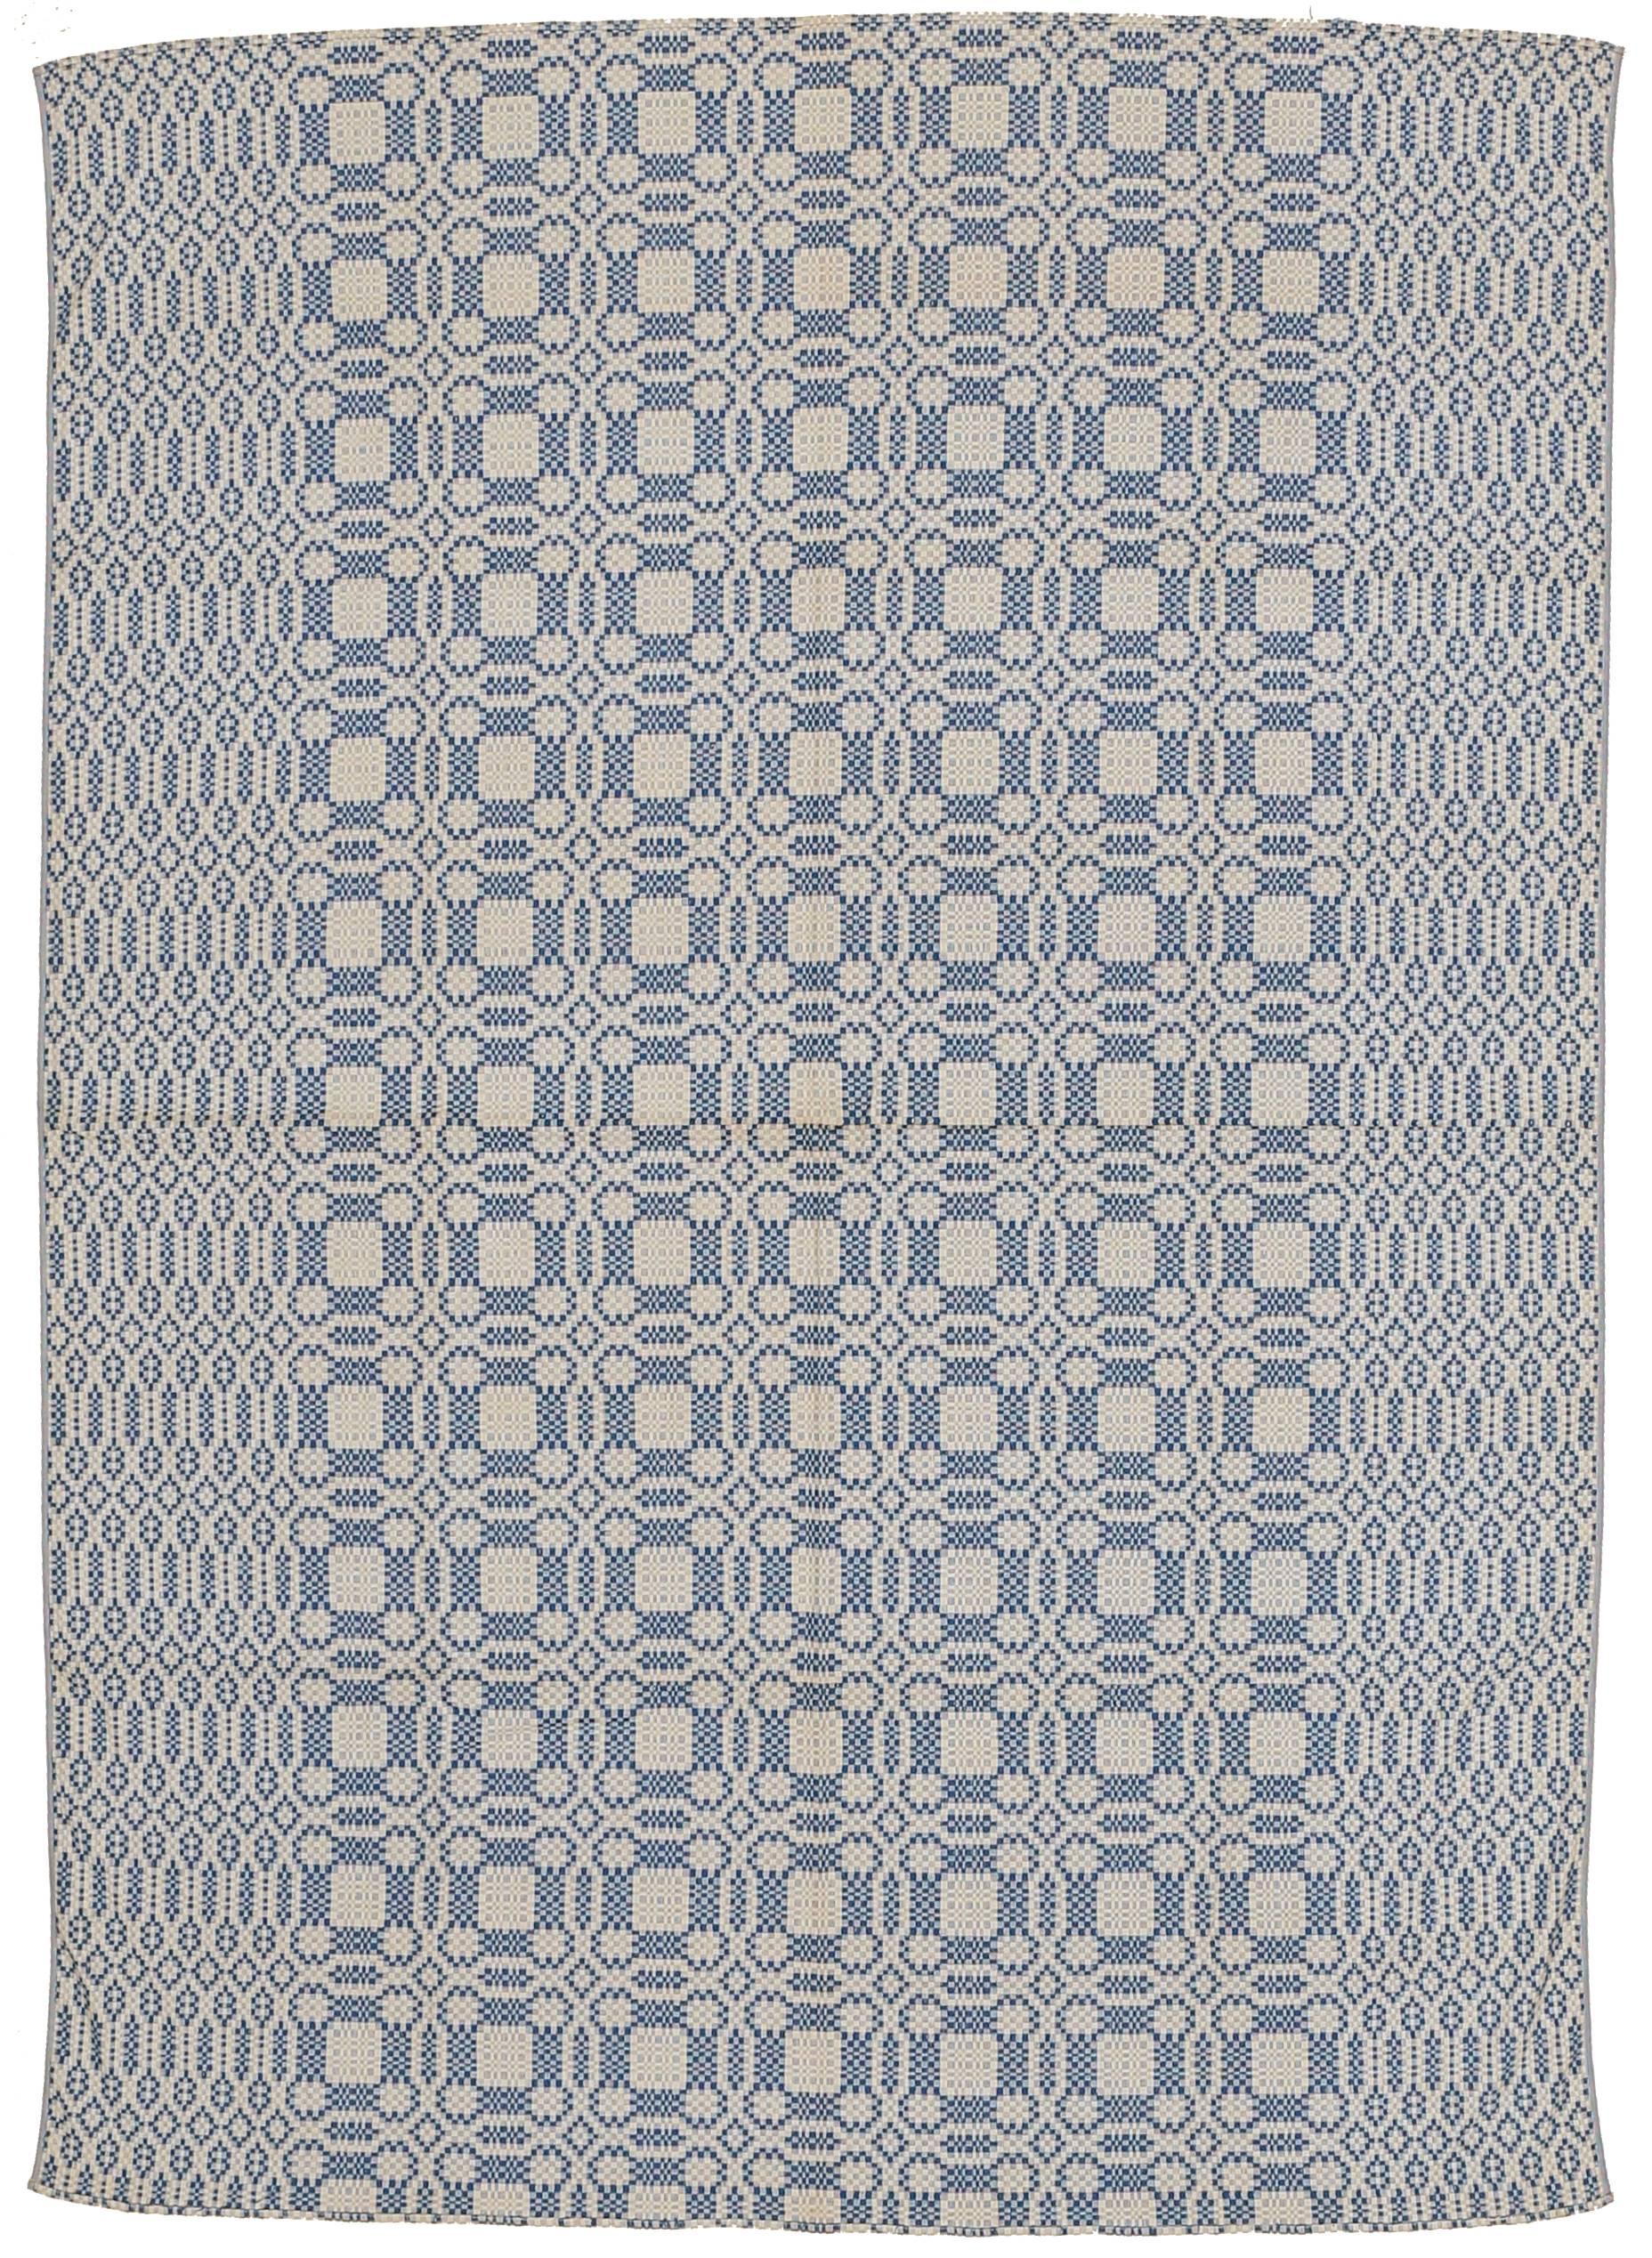 A fine antique North American reversible cotton coverlet, distinguished by a repeat pattern of overlapping roundels containing geometric motifs in medium-light blue on an ivory background. The geometric border consists of stacked rows of stylised